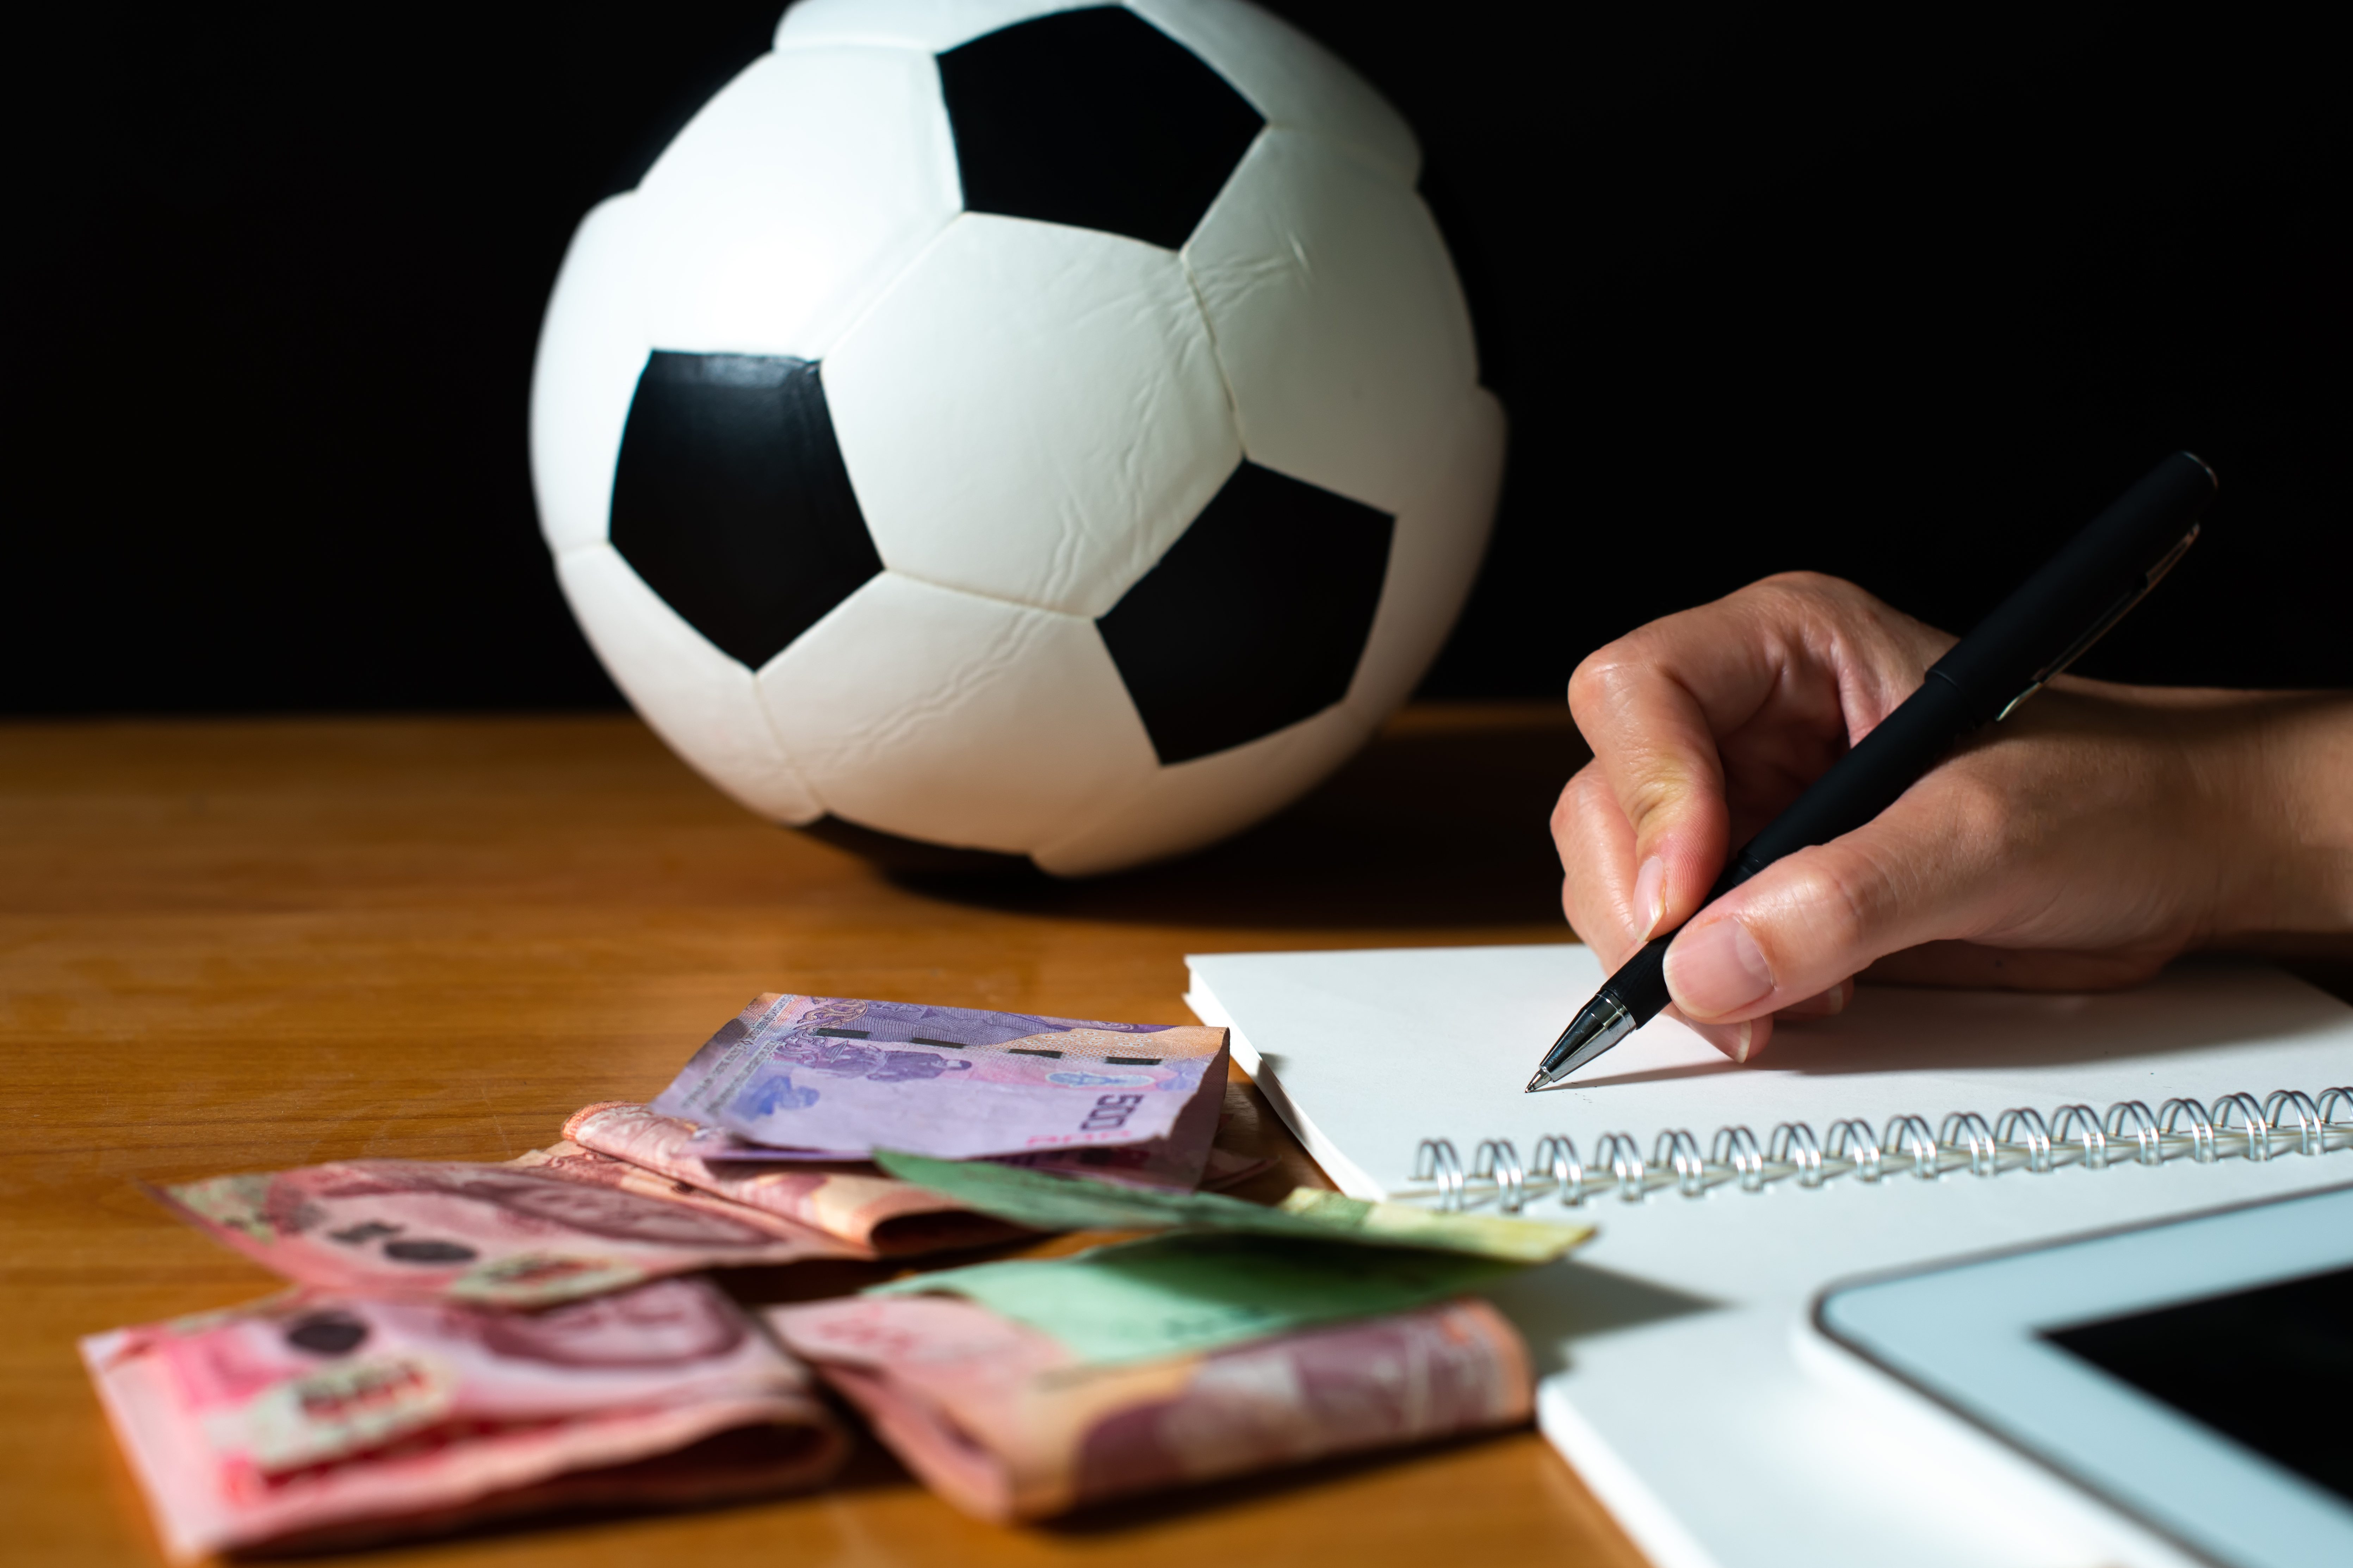 Soccer draws billions in illegal bets each year